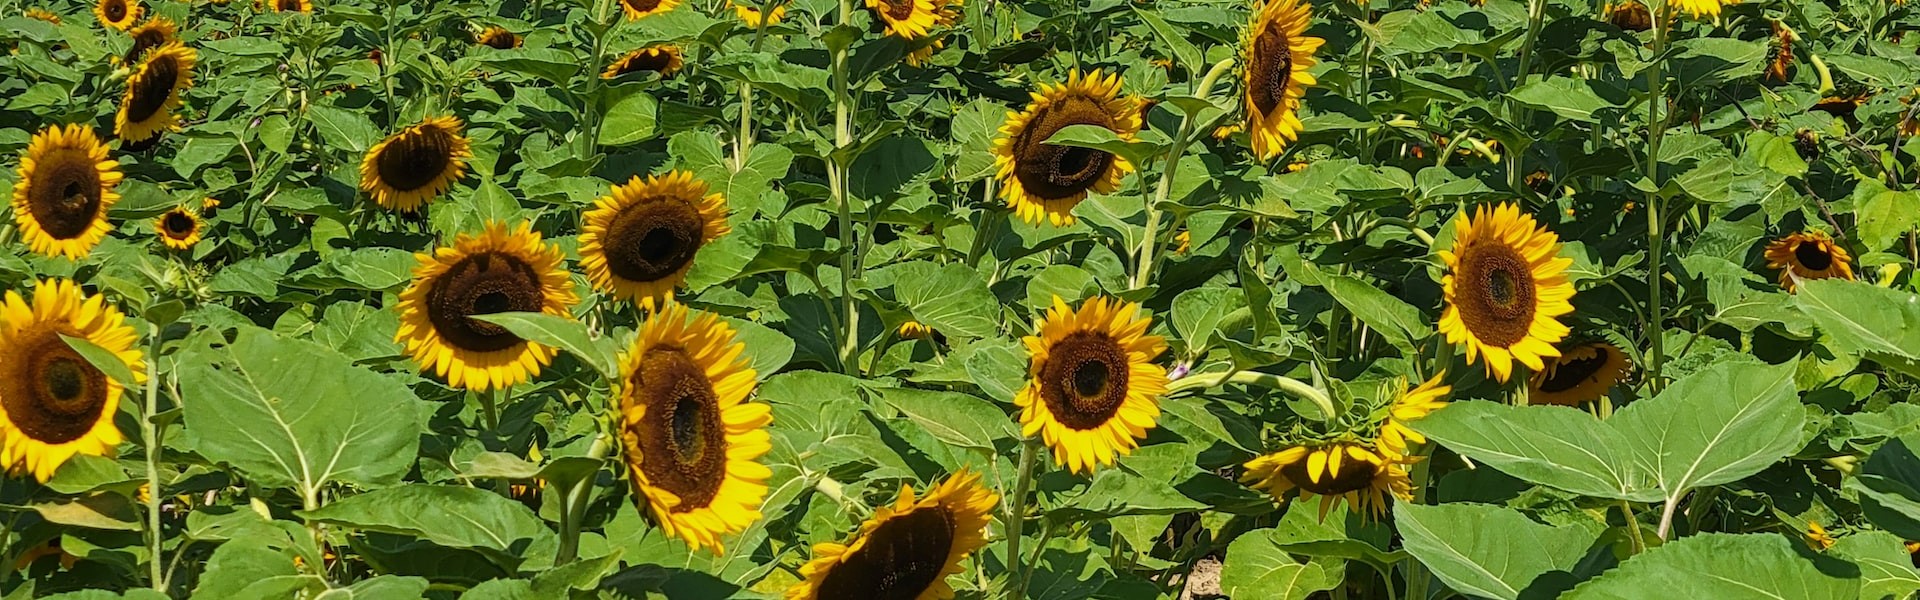 Sunflower field in maryland | Breast Cancer Car Donations